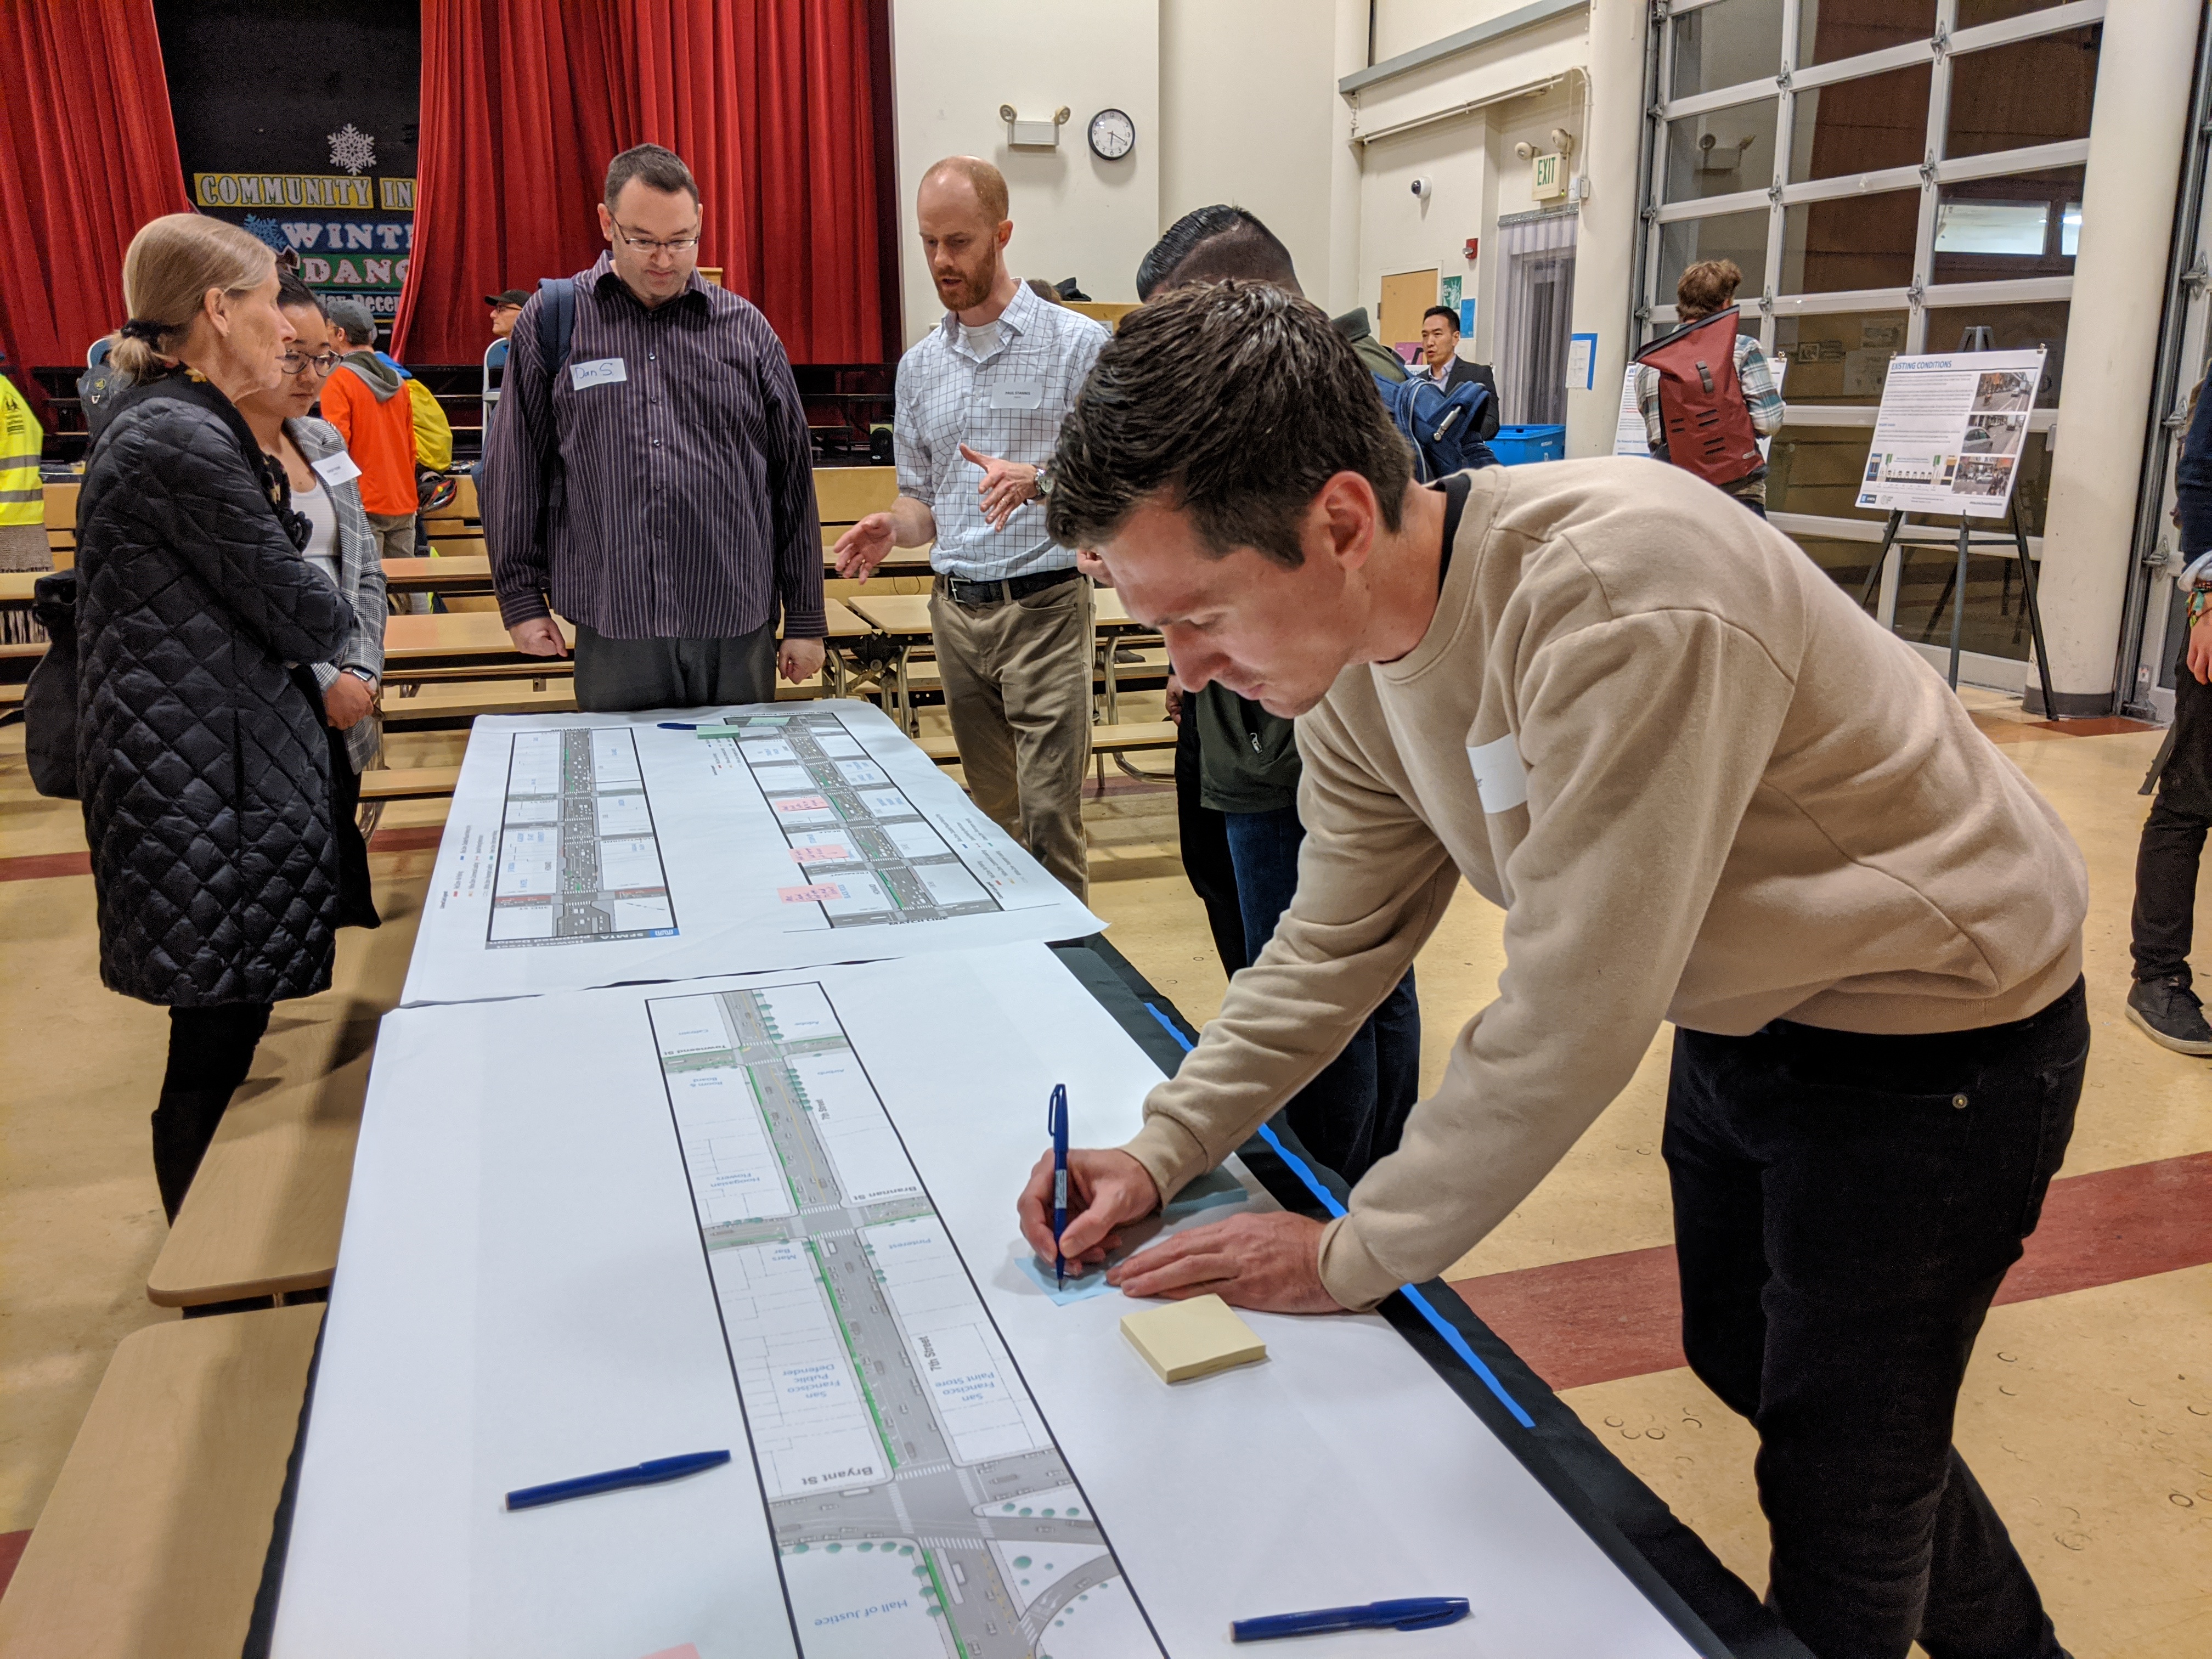 Advocate Parker Day makes notes on the plans at last night's open house